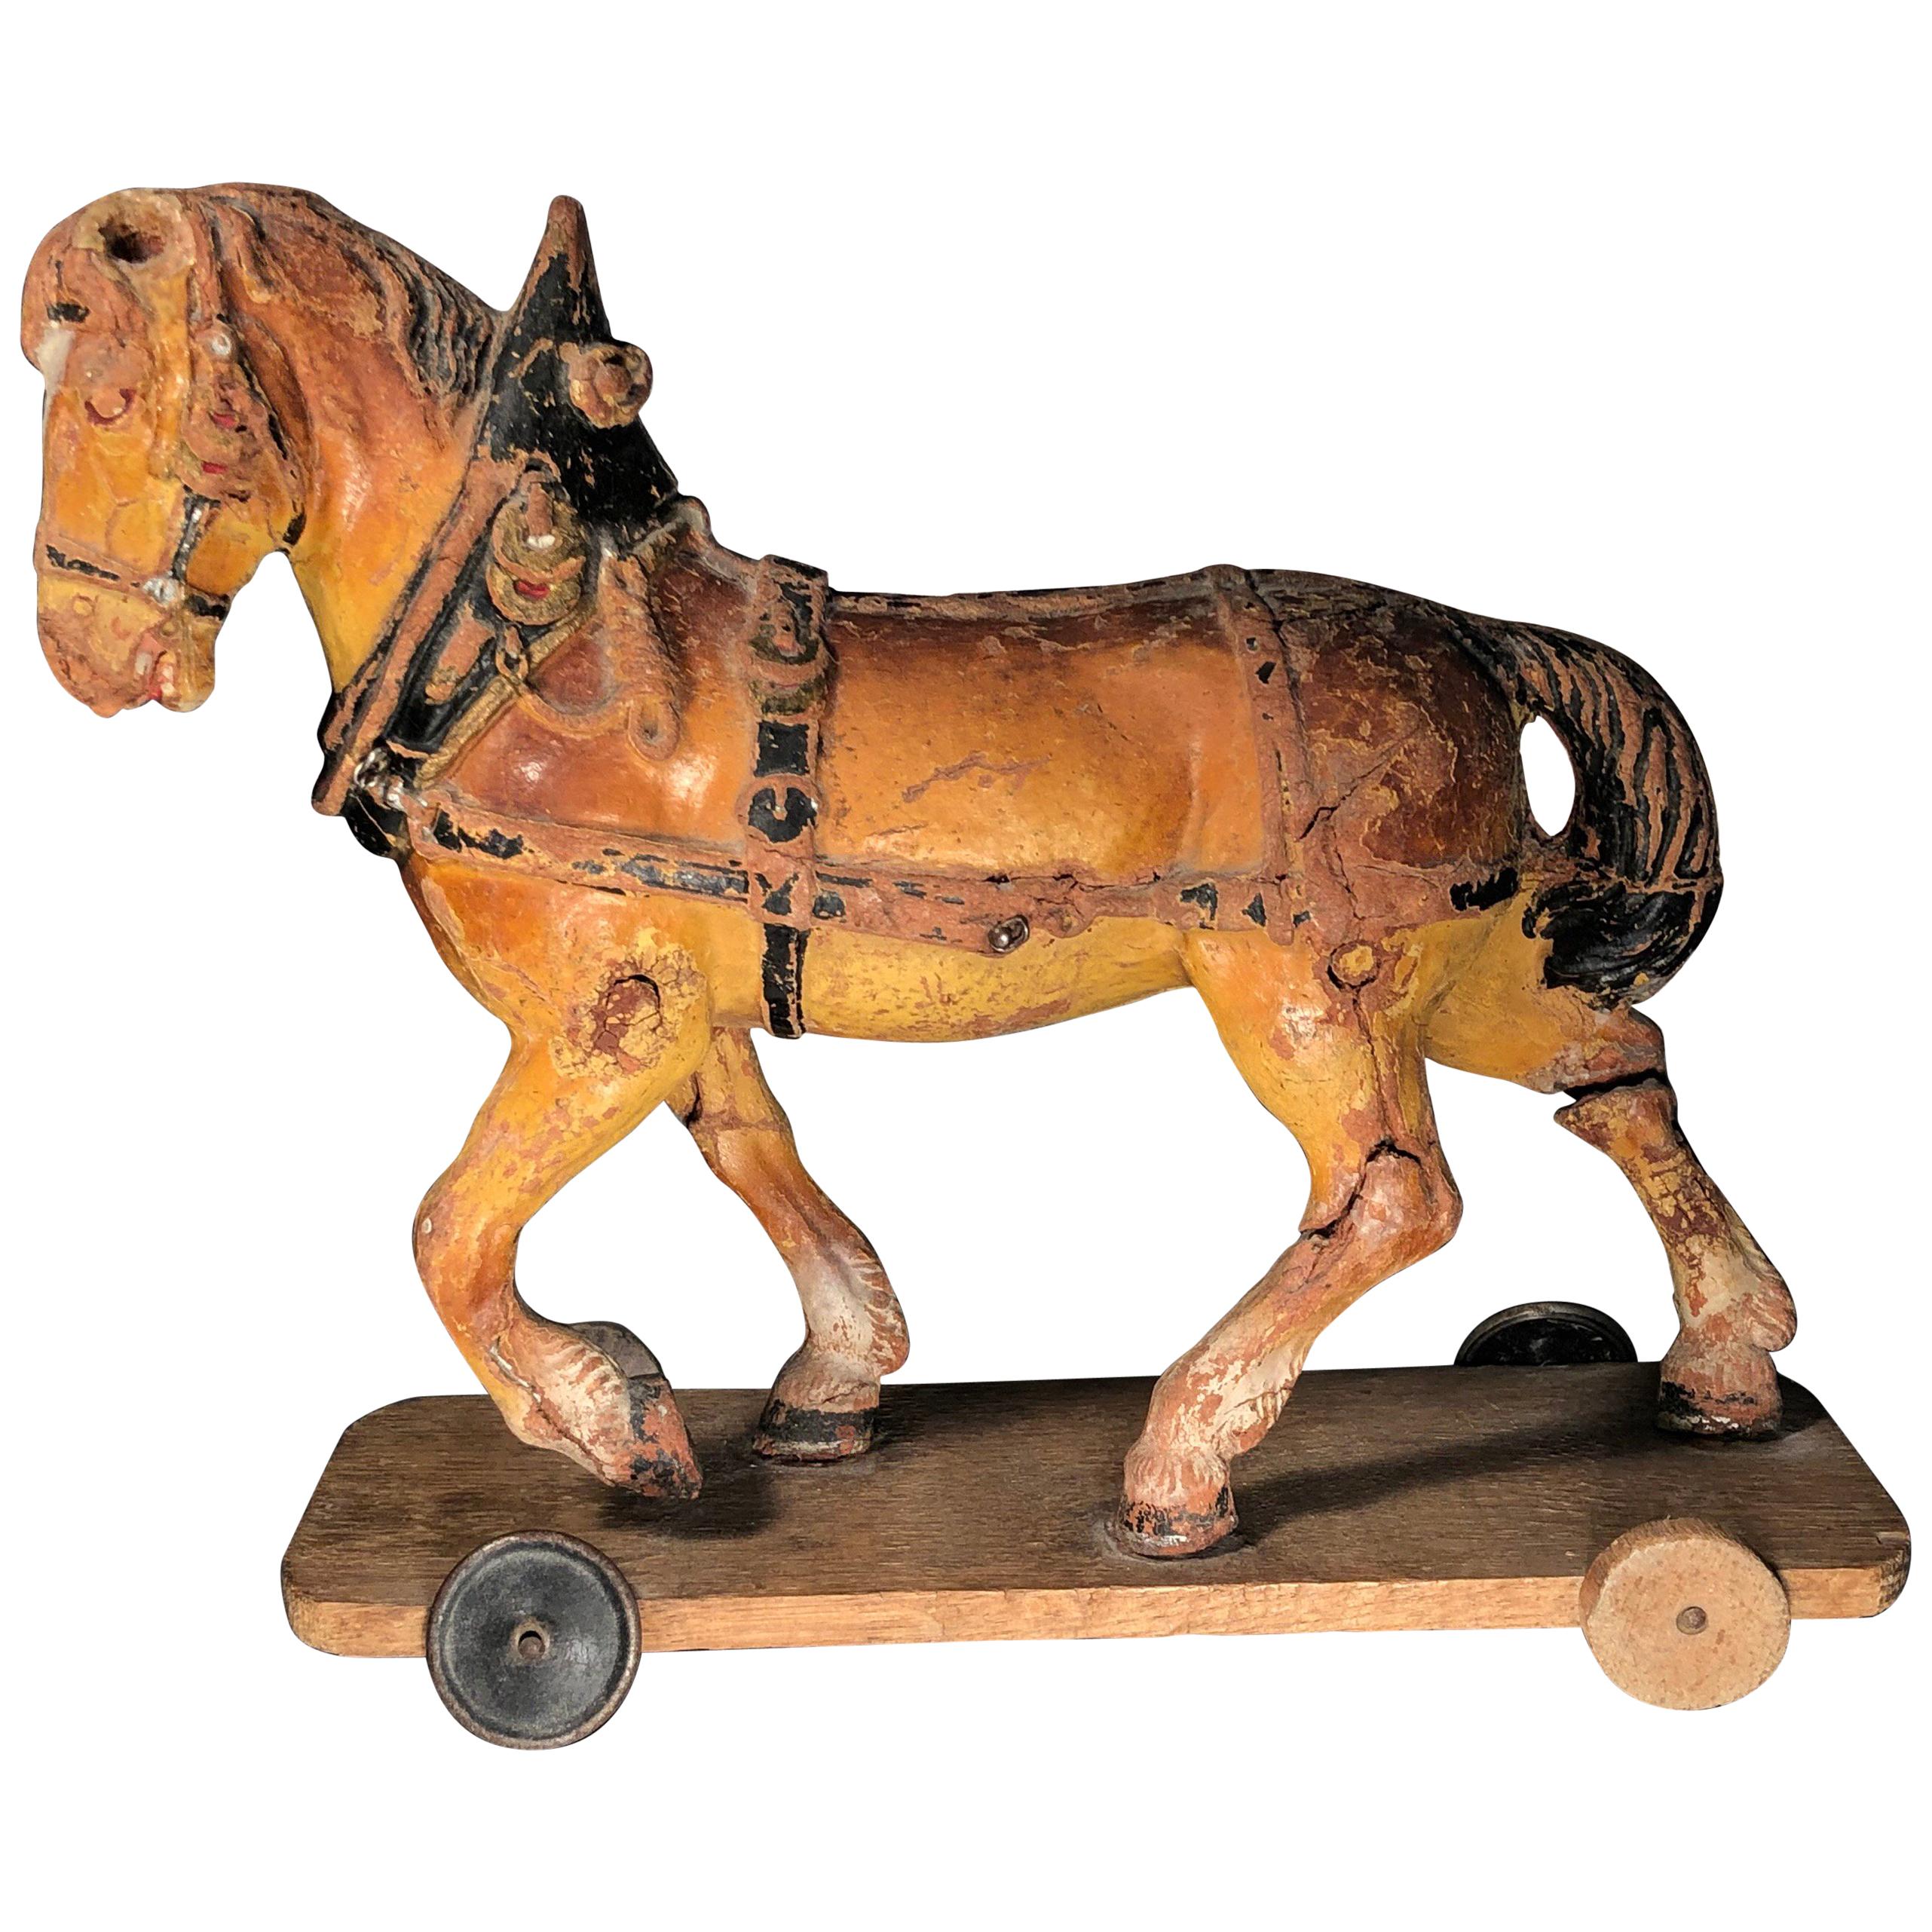 Antique Wooden Toy Horse, 19th Century ON SALE 